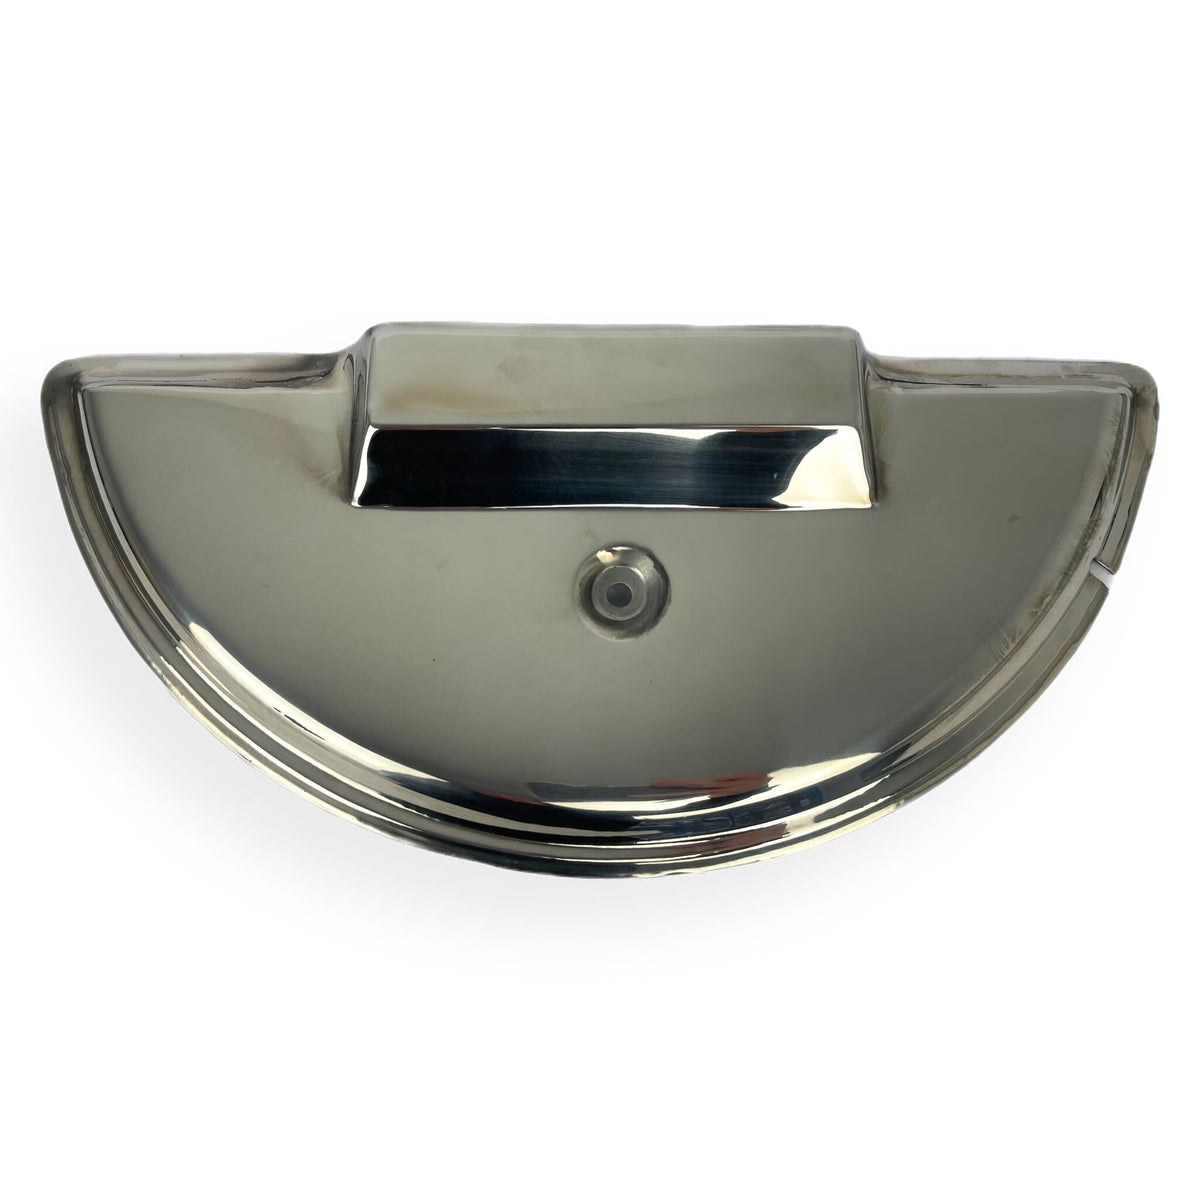 Vespa PX PE T5 Spare Wheel Cover - Polished Stainless Steel